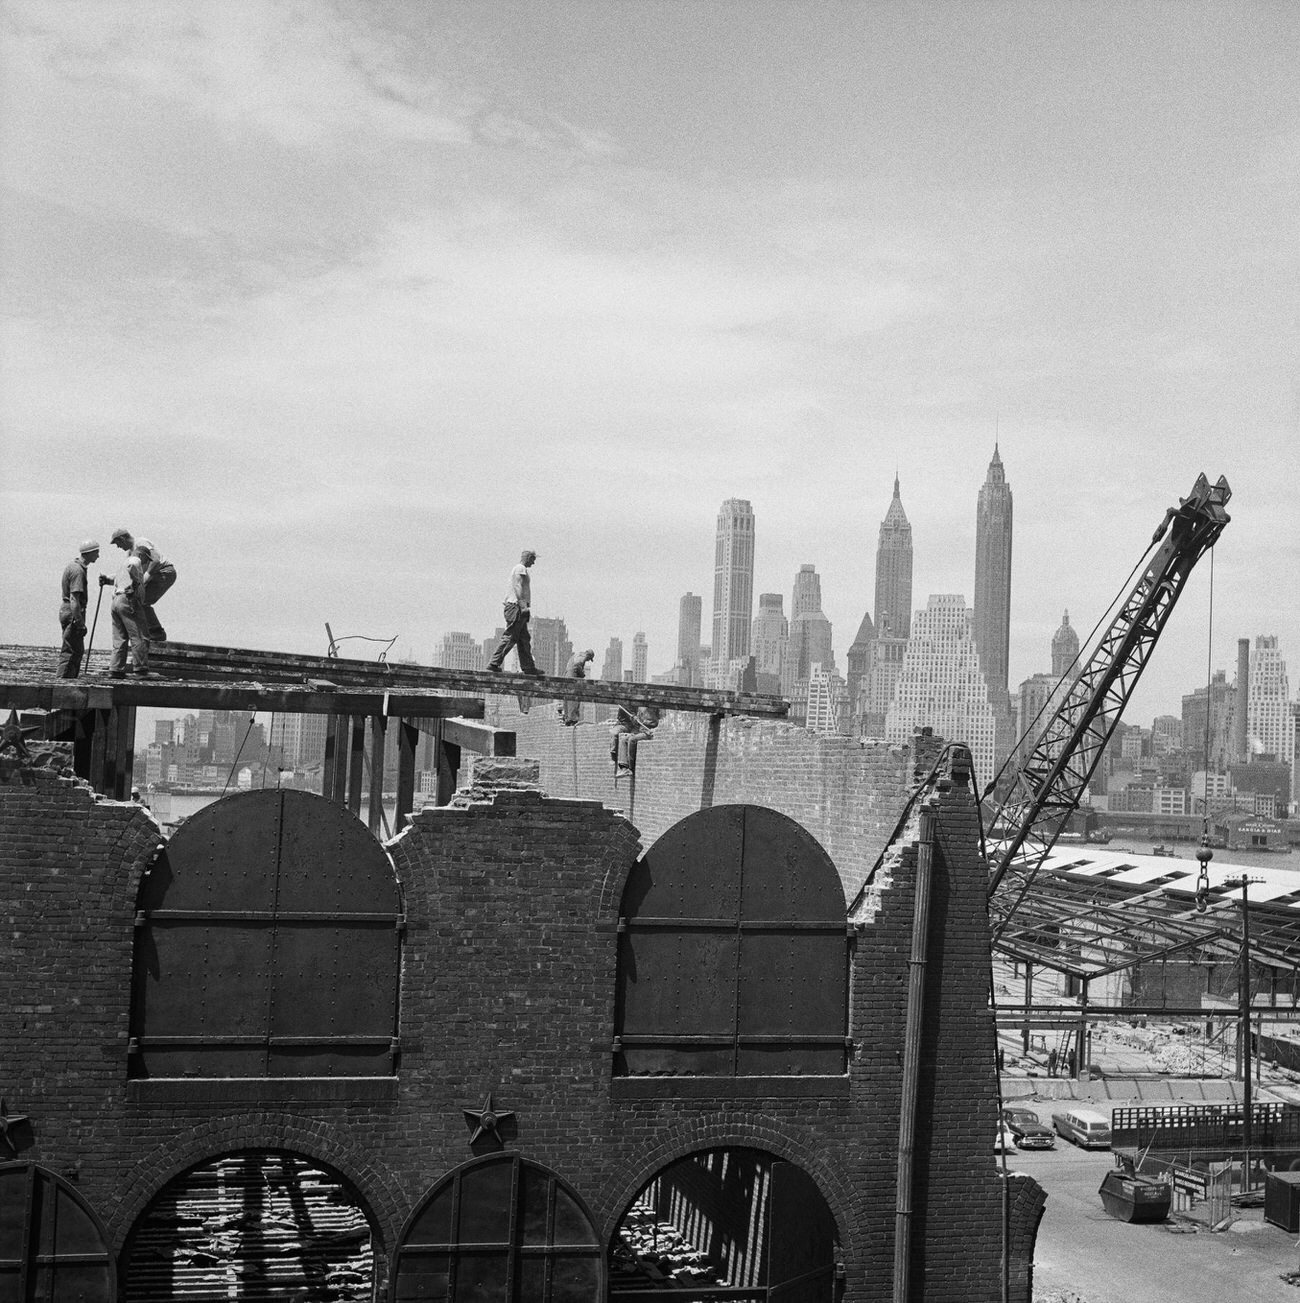 Construction Workers Build Against The Manhattan Skyline In Brooklyn Heights, 1958.